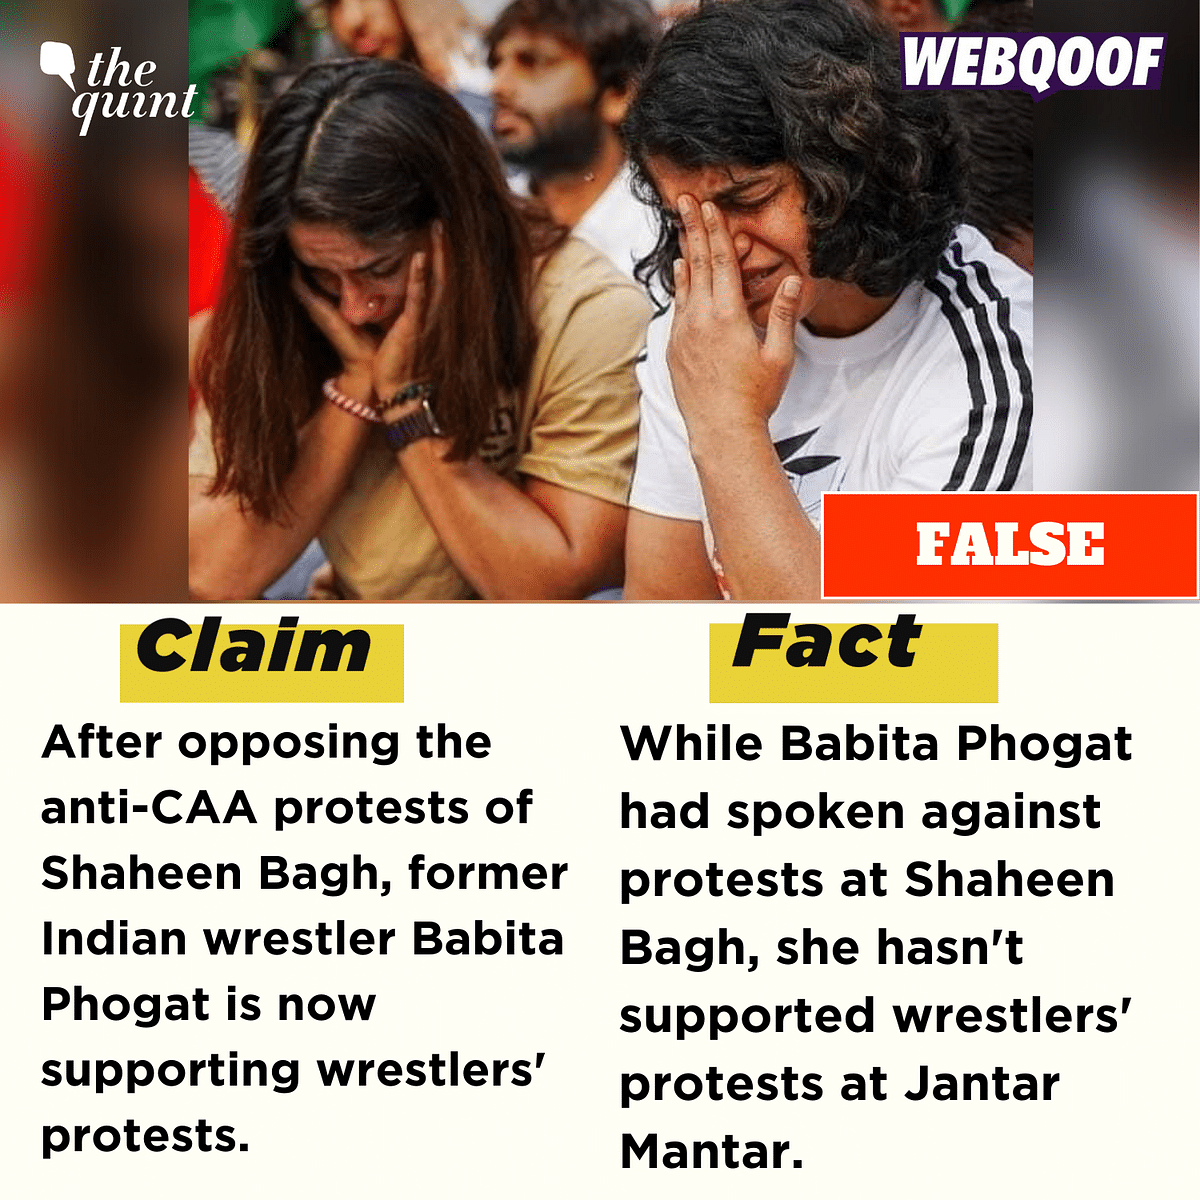 From misinformation around wrestlers' protests at Jantar Mantar to media misreporting. 